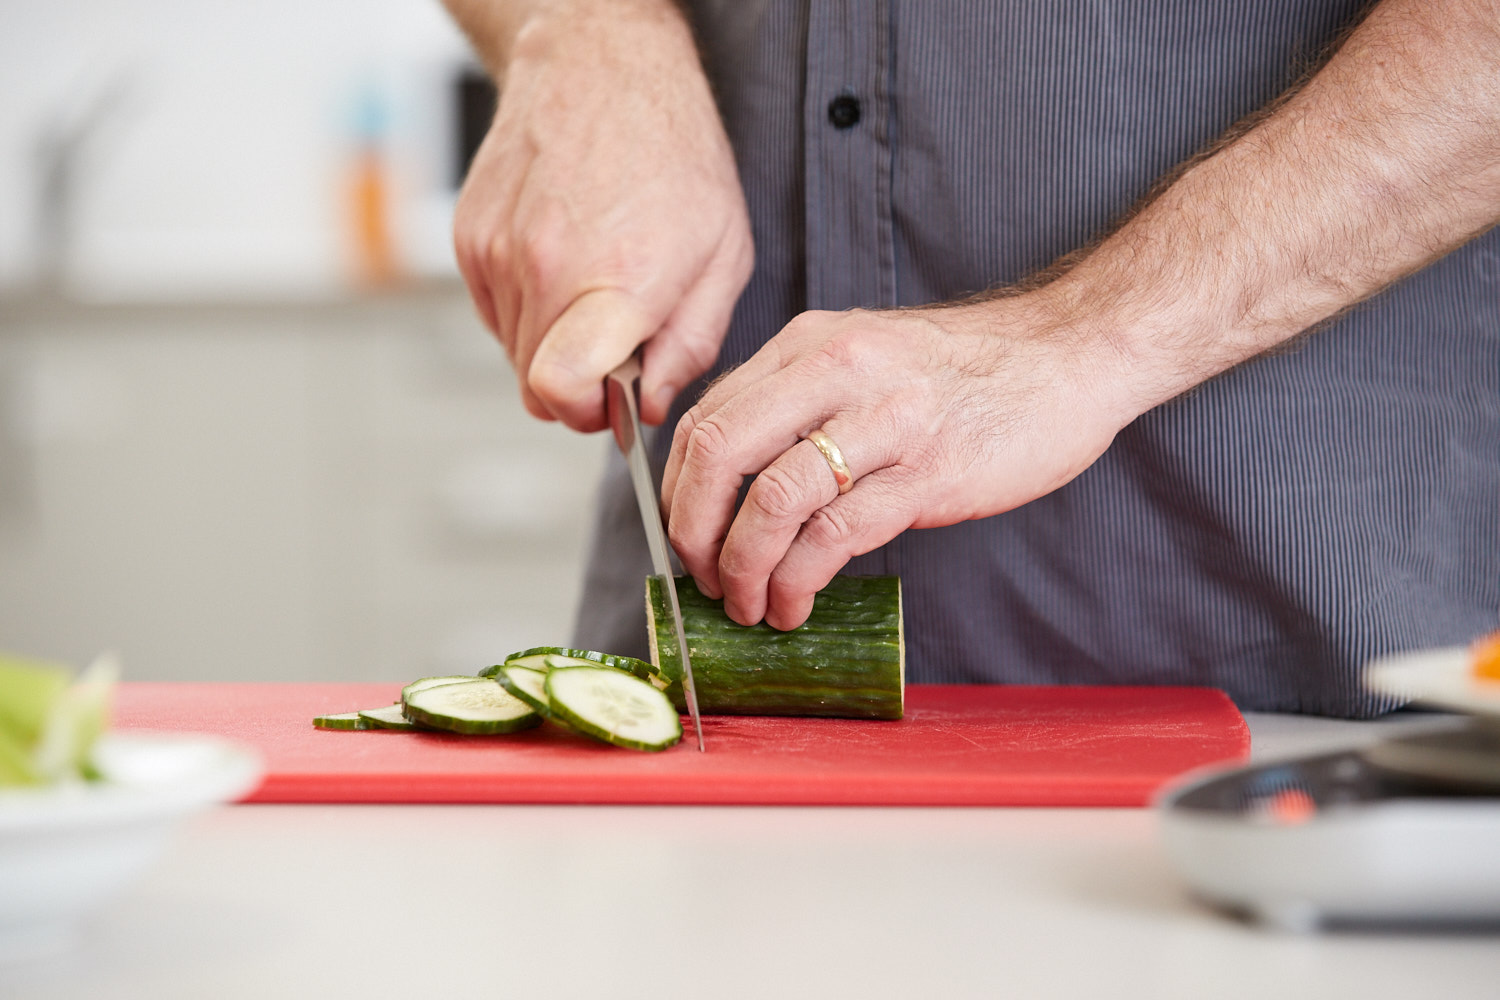 "Close-up shot of a person's hand as they chop up some cucumber"